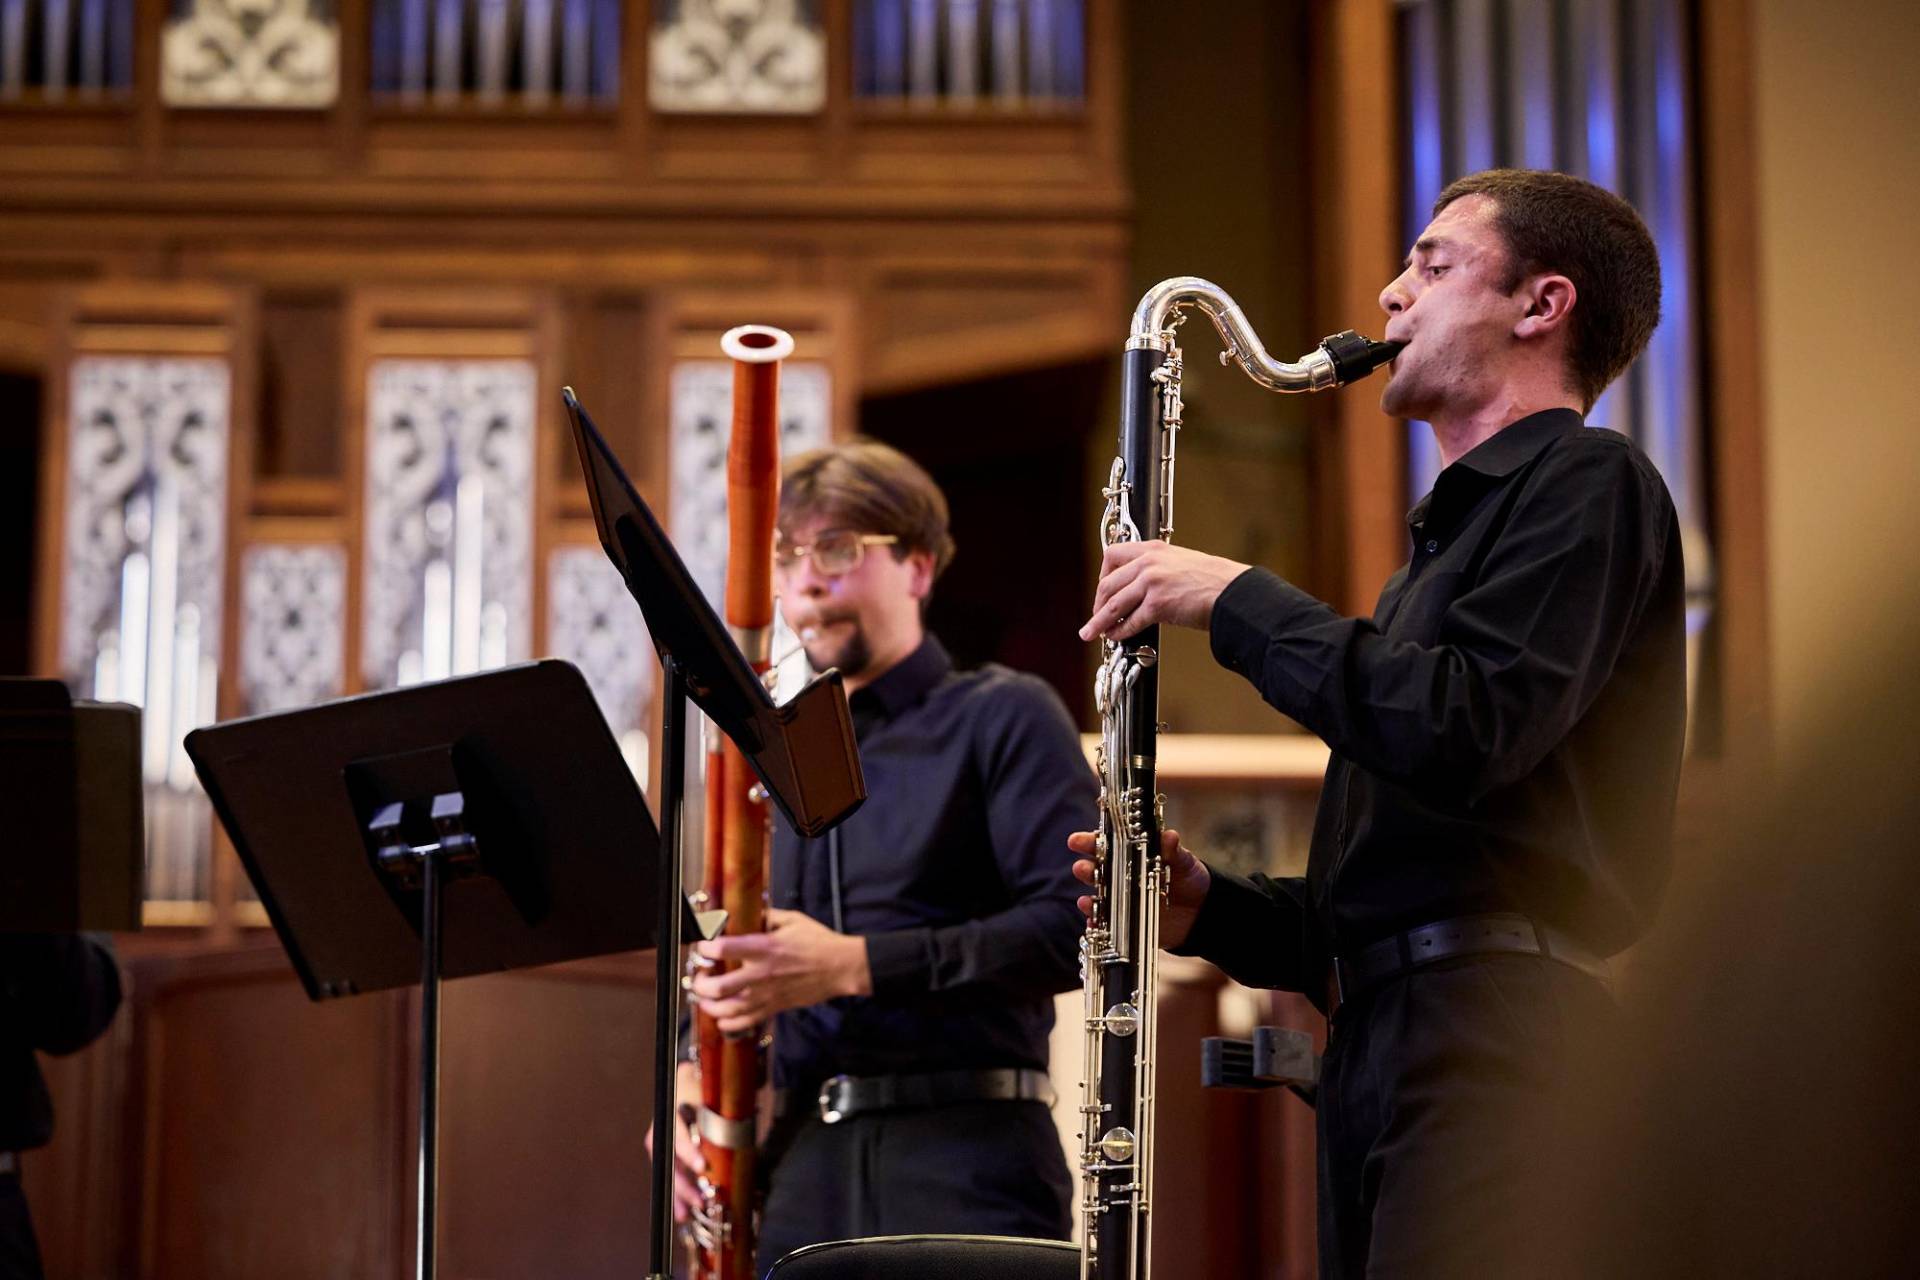 Musicians at the AYO National Music Camp play on stage in front of an organ. They are paying a bassoon and a bass clarinet, and wearing concert blacks. Claudio Raschella 2023